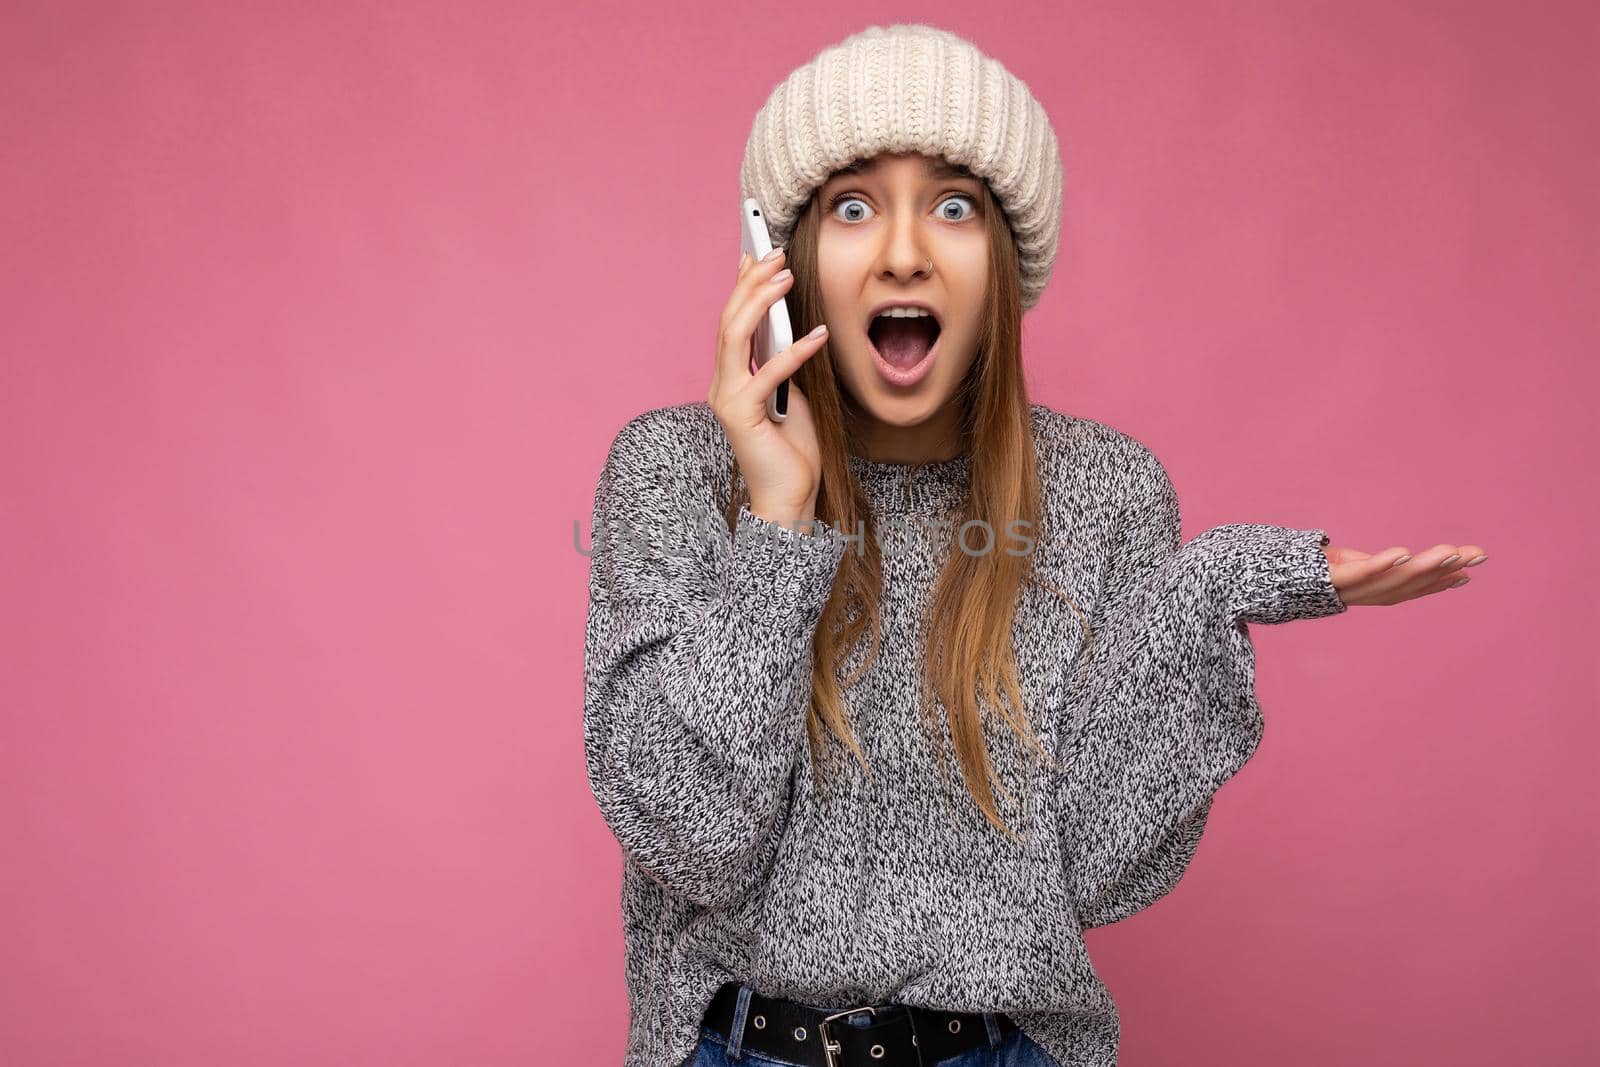 Closeup portrait of Attractive amazed young blonde woman wearing casual grey sweater and beige hat isolated over pink background holding in hand and talking on mobile phone looking at camera with open mouth.